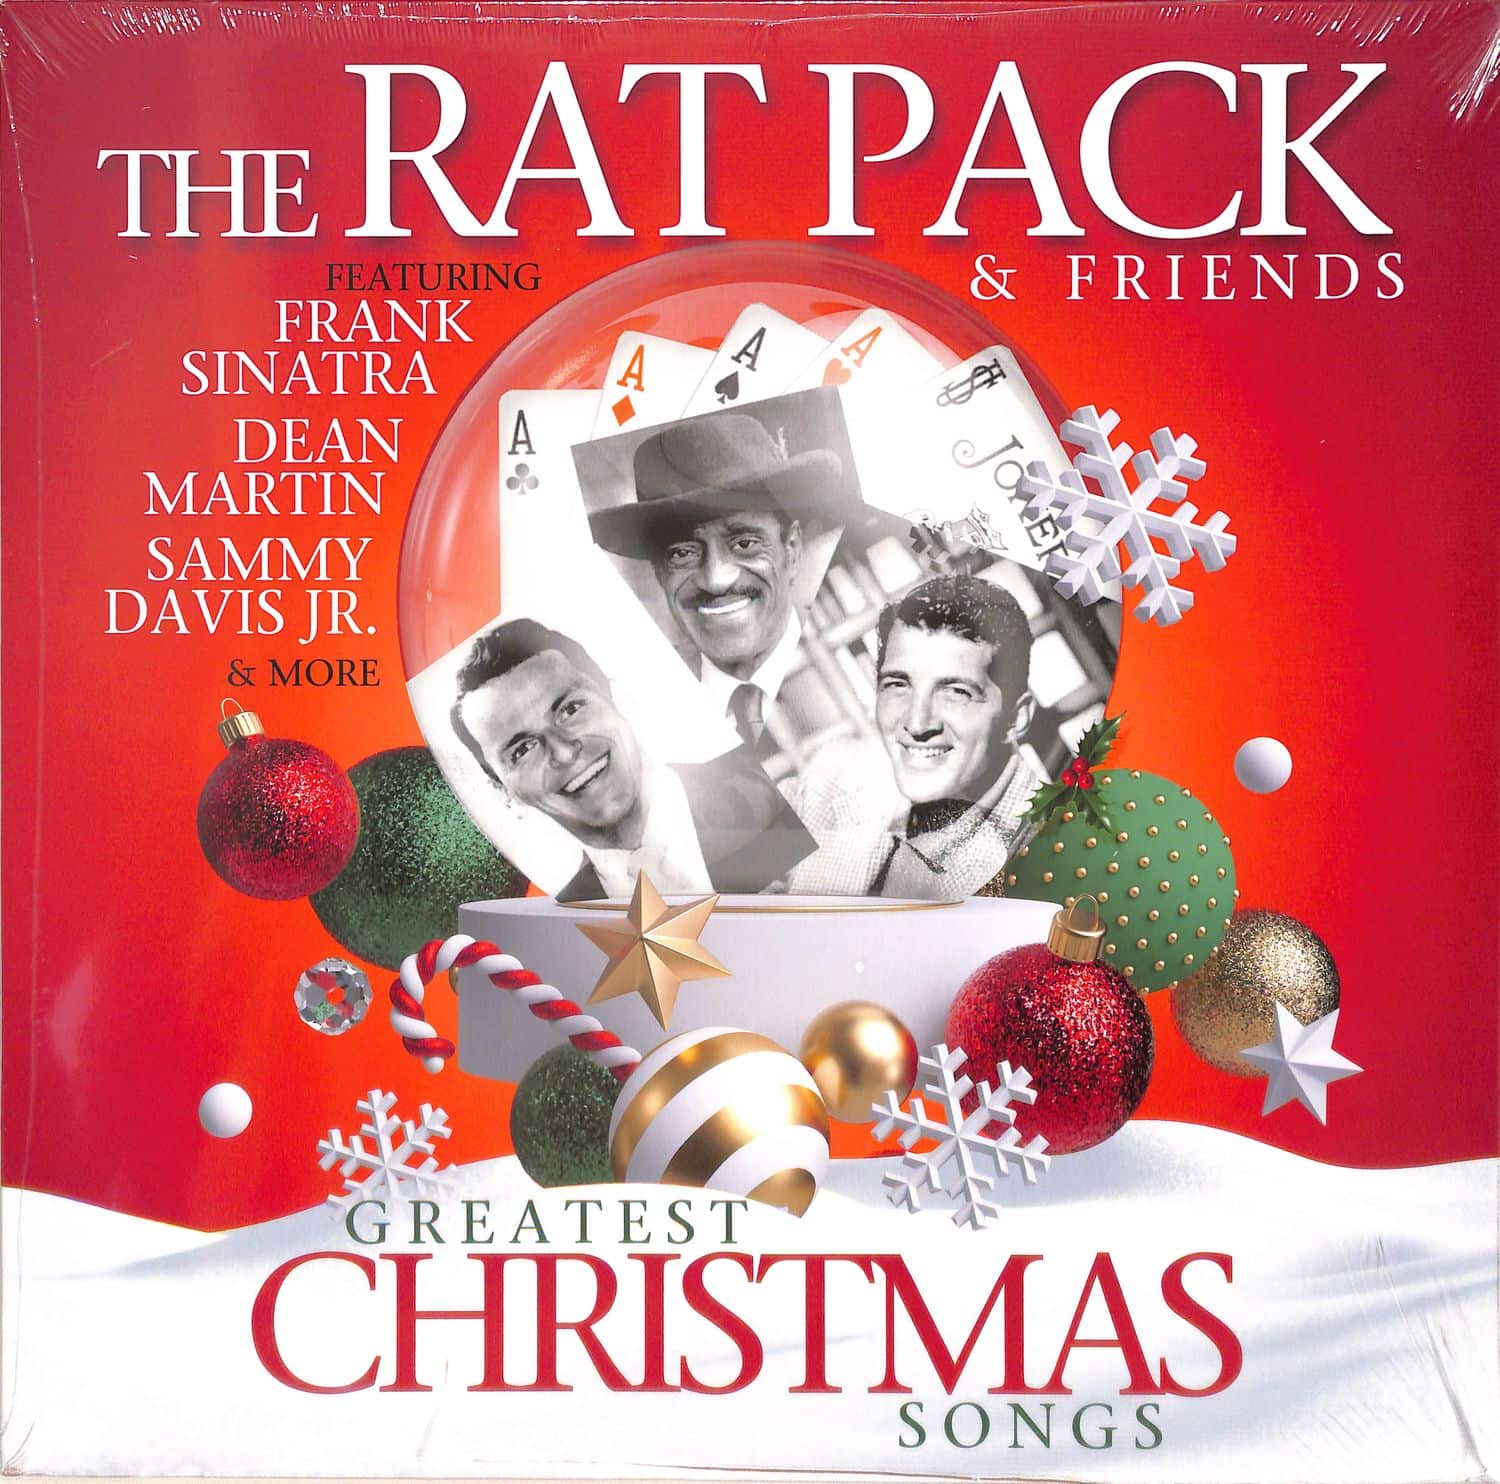 The Rat Pack & Friends / Frank Sinatra & Dean Martin - GREATEST CHRISTMAS SONGS 